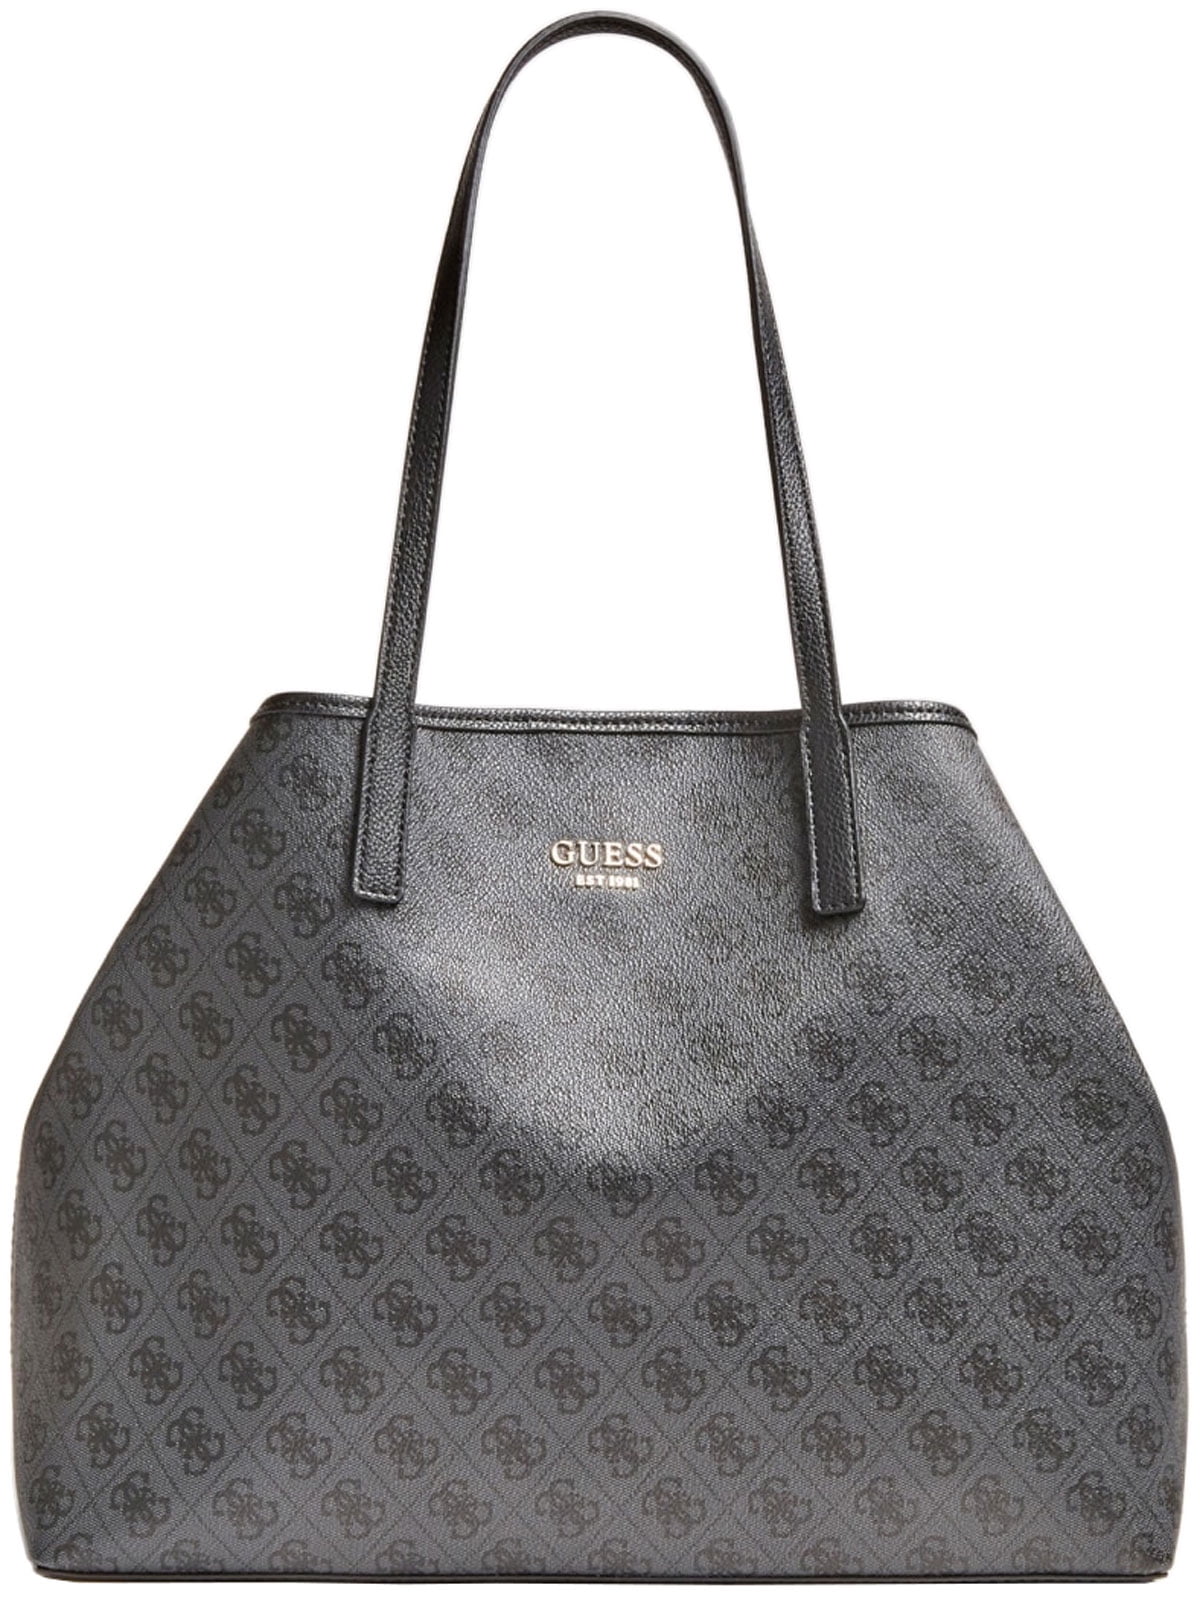 Guess Vikky Women's Synthetic Tote Bag in Coal Size One Size 